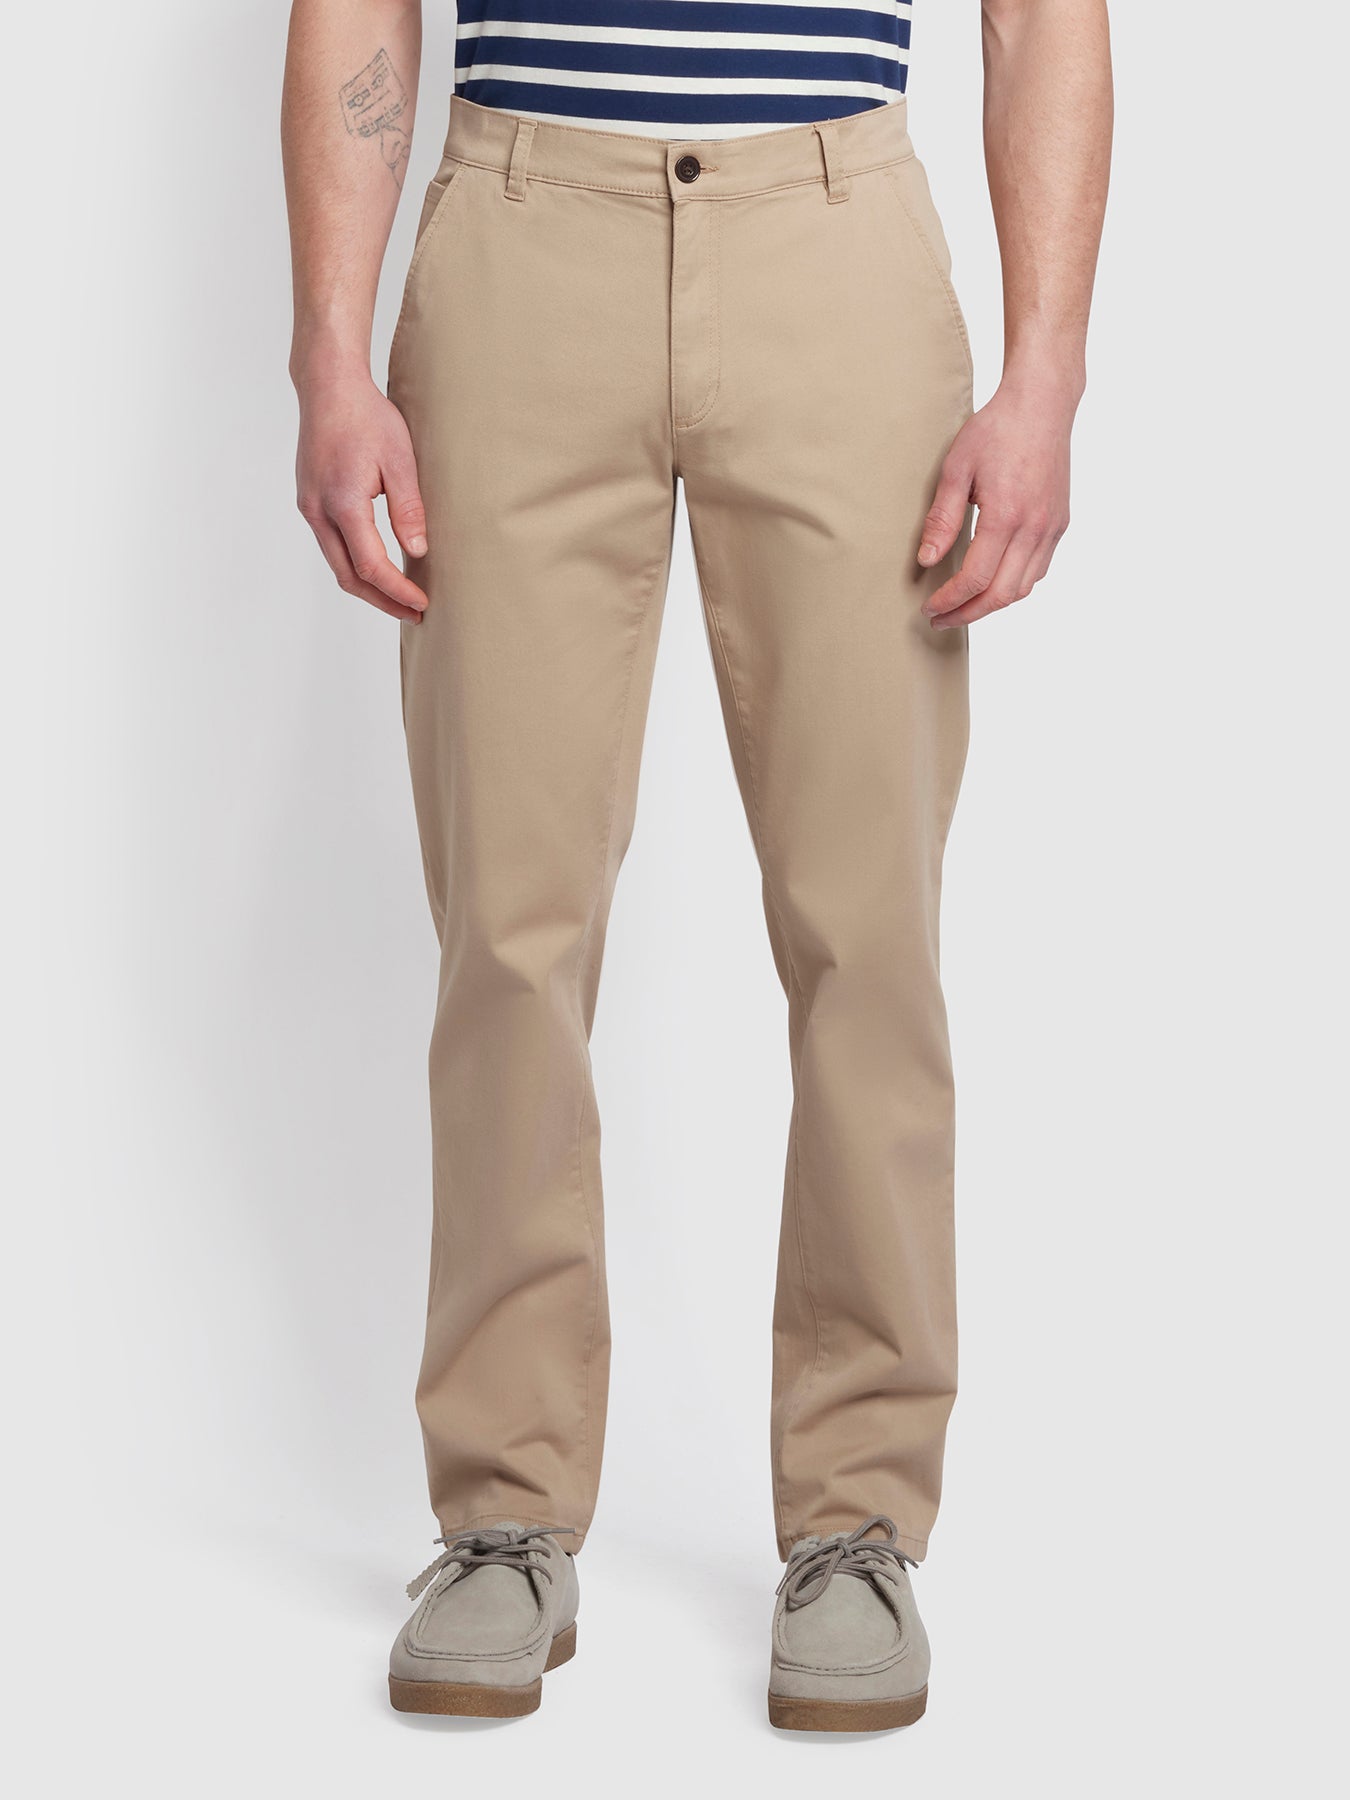 View Lawson Regular Fit Twill Chinos In Burnt Sand information